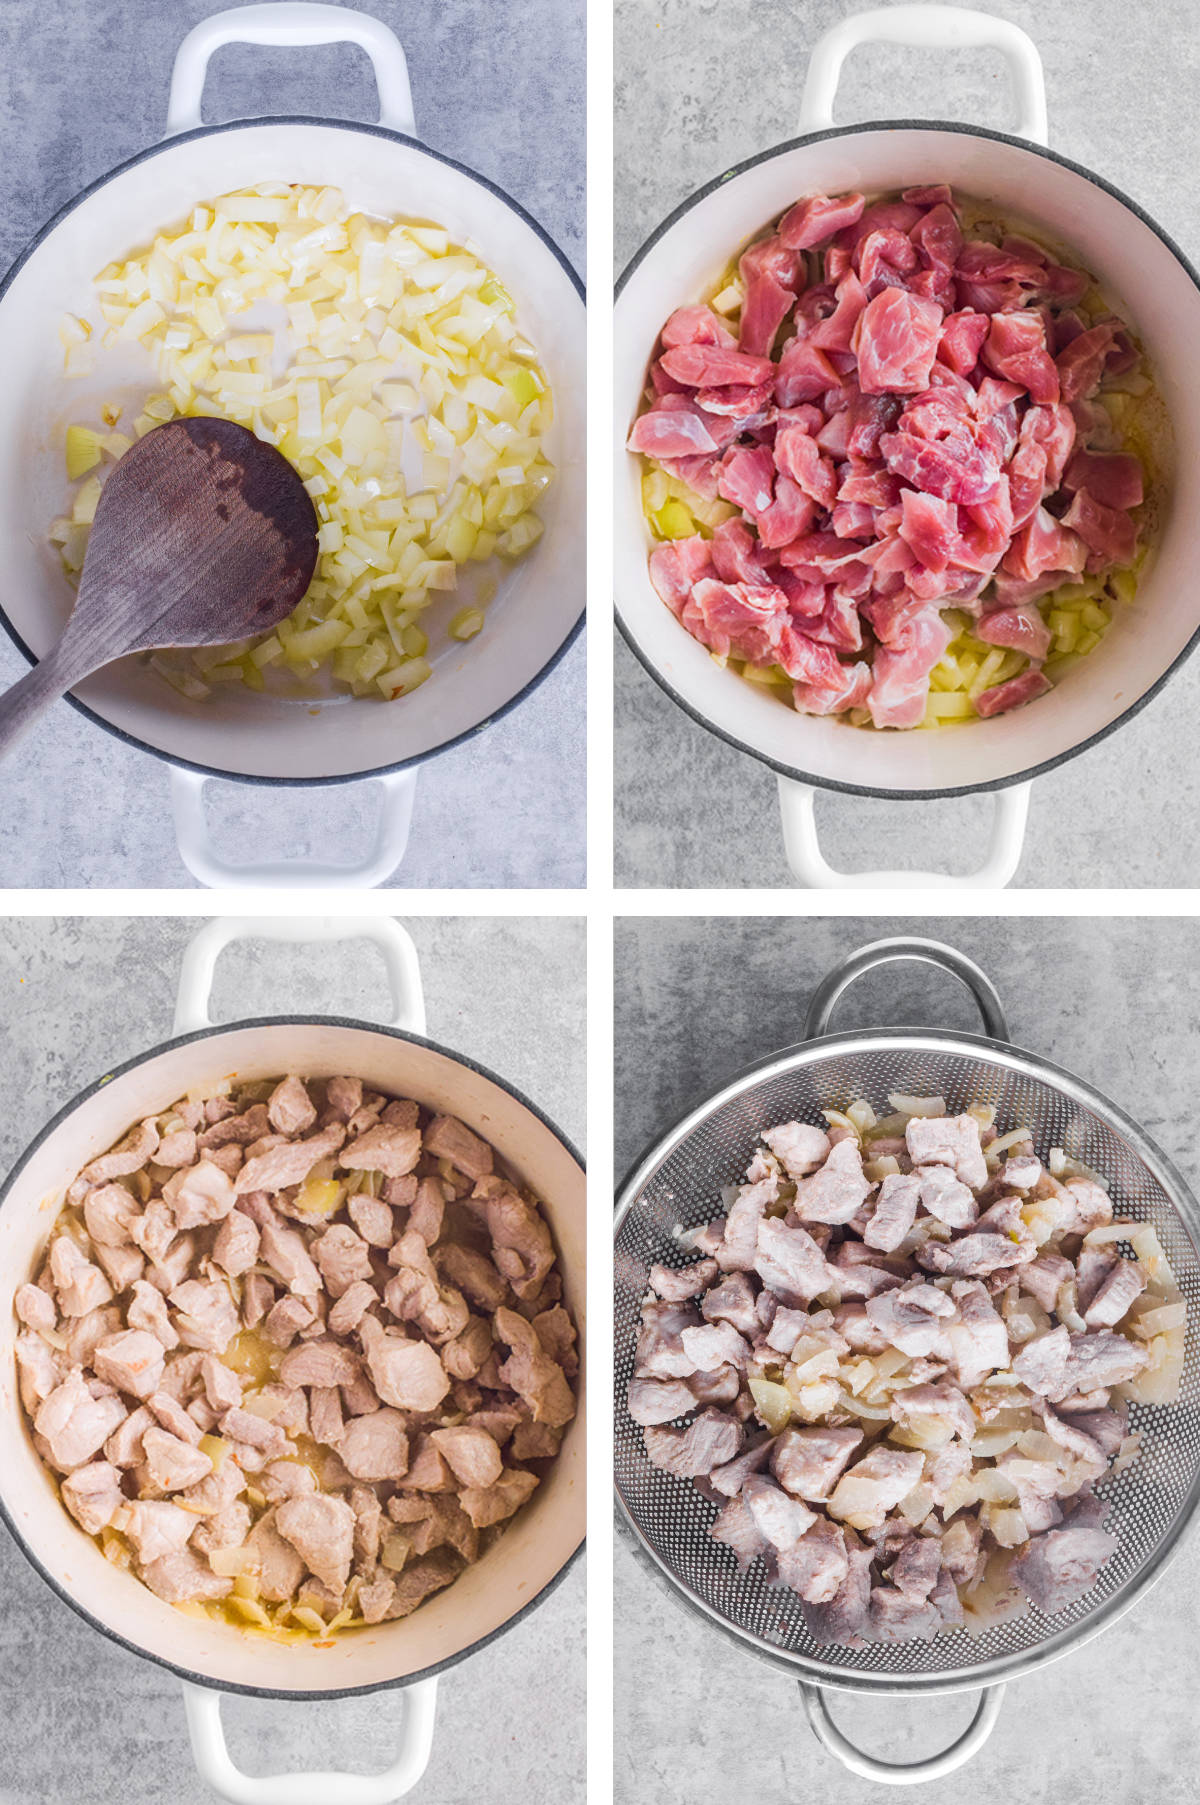 Four overhead images in one: 1. Onions in white pot. 2. Raw Pork added to pot. 3. Pork and onions cooked in pot. 4. Pork and onions in strainer. 